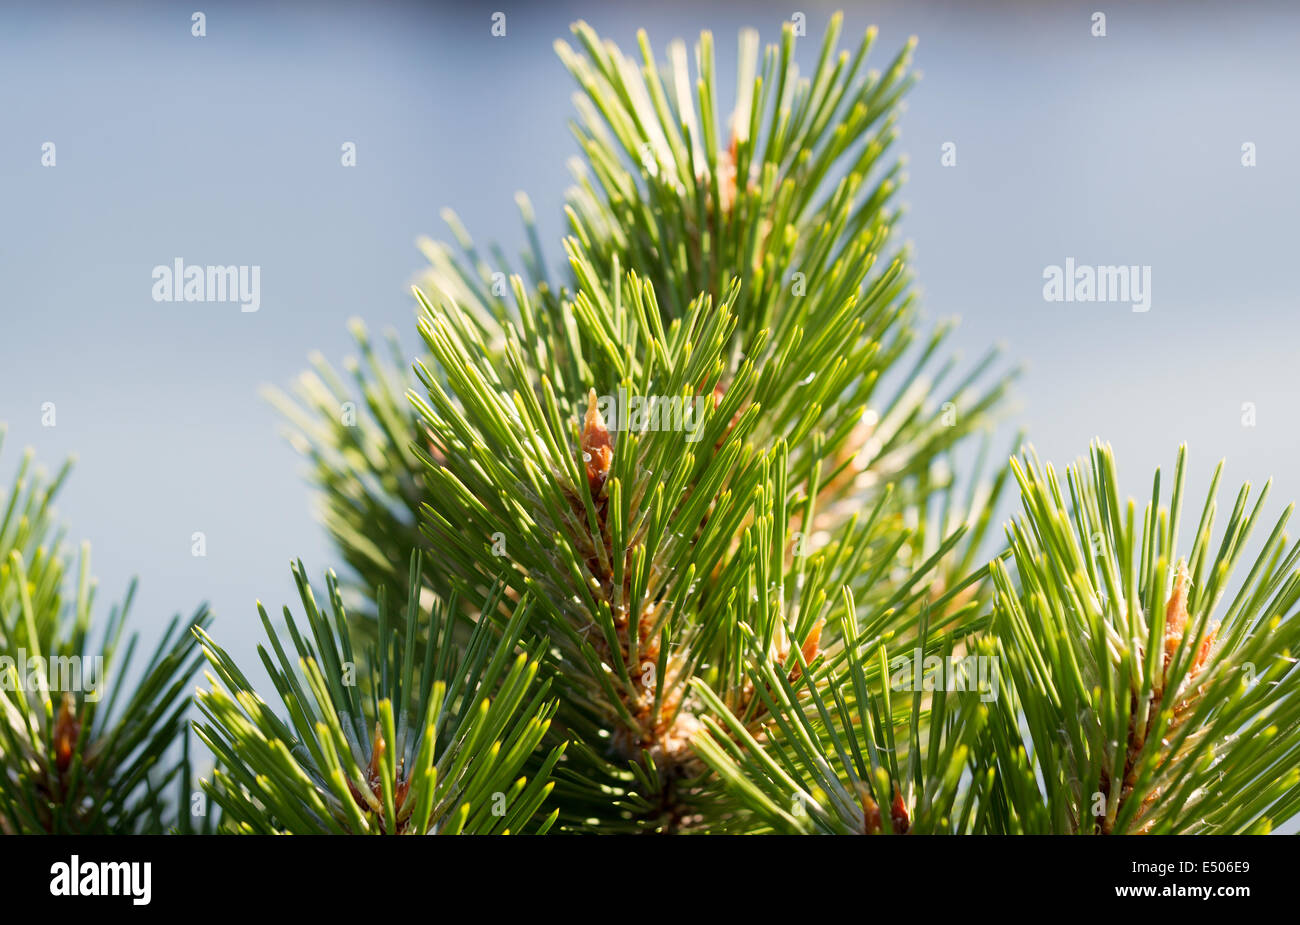 Closeup horizontal photo of upper part of pine tree, top part in focus, with blurred ocean in background Stock Photo